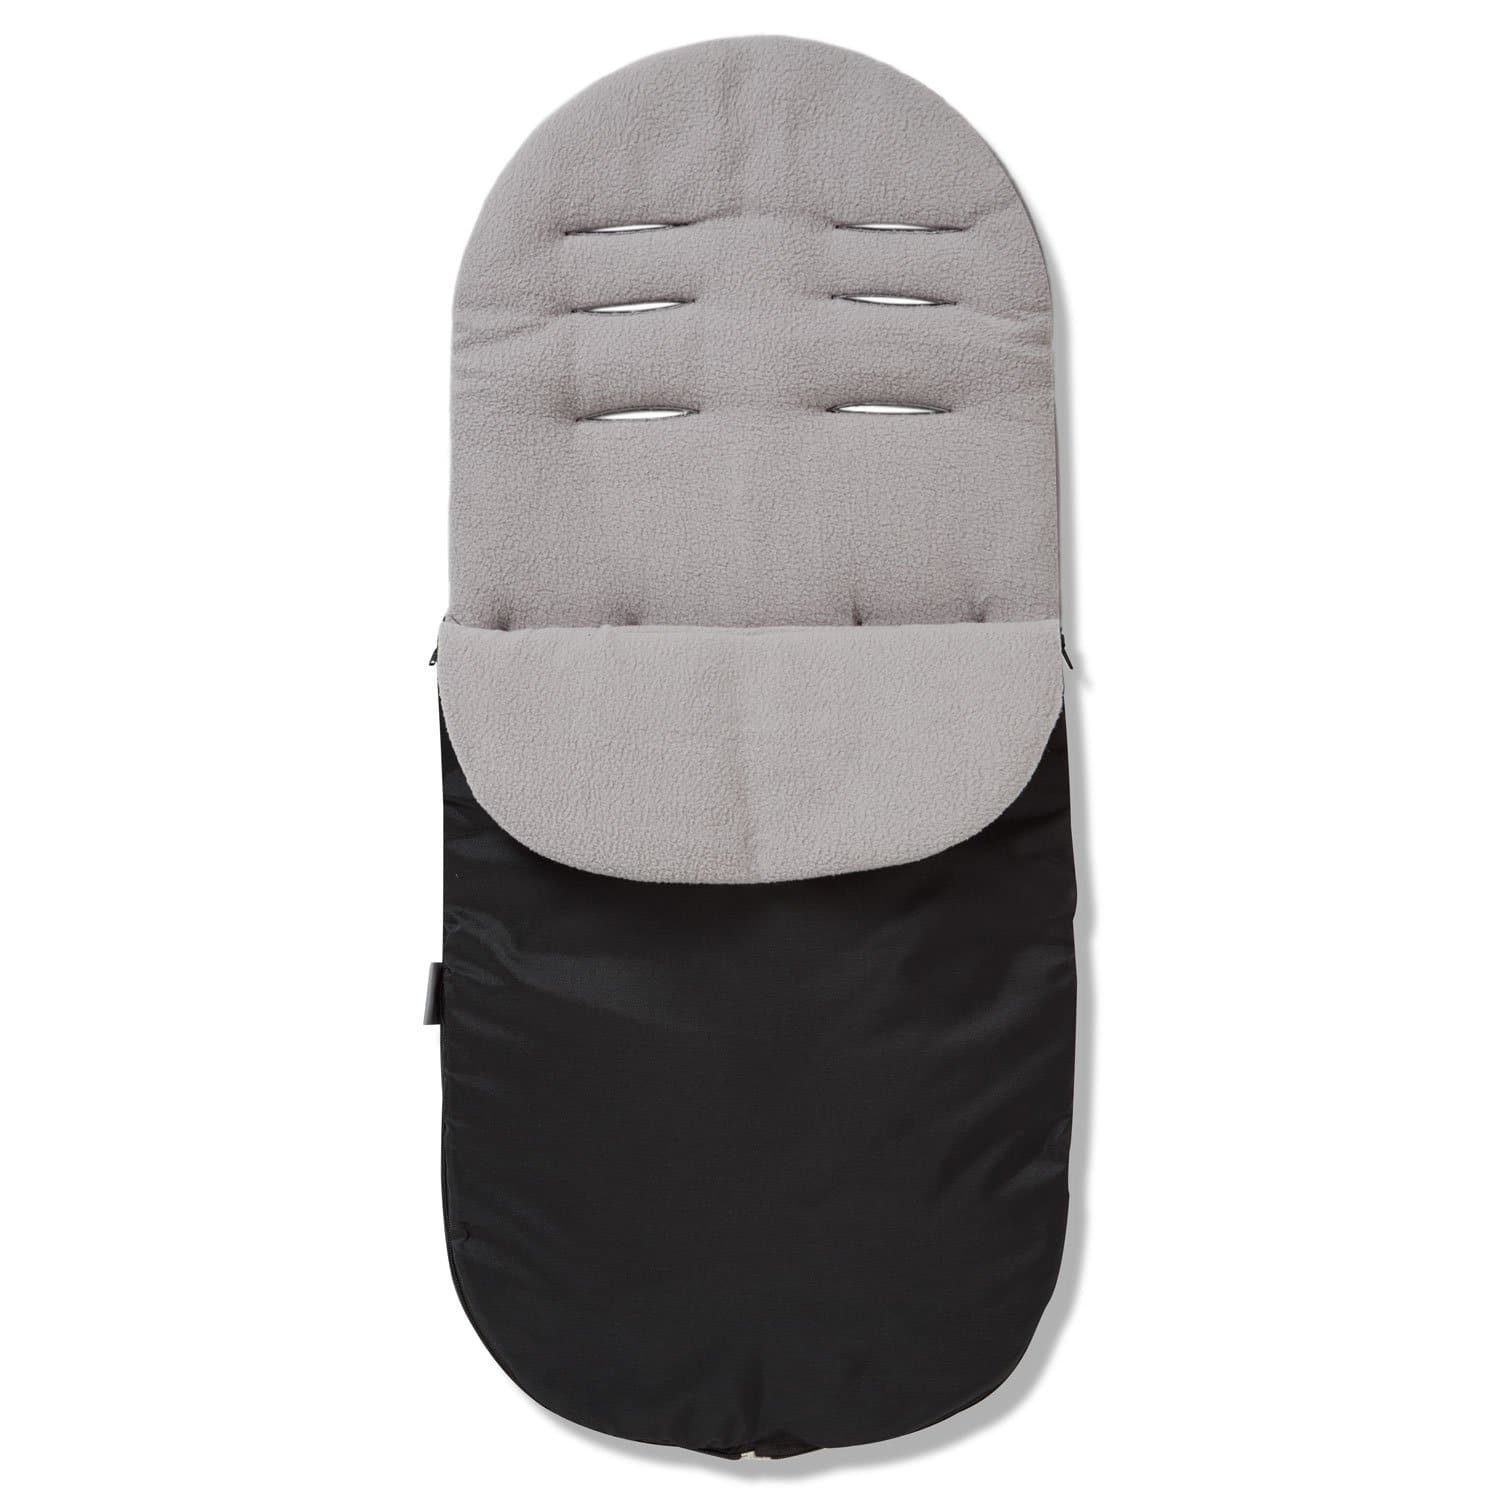 Footmuff / Cosy Toes Compatible with Combi - Grey / Fits All Models | For Your Little One